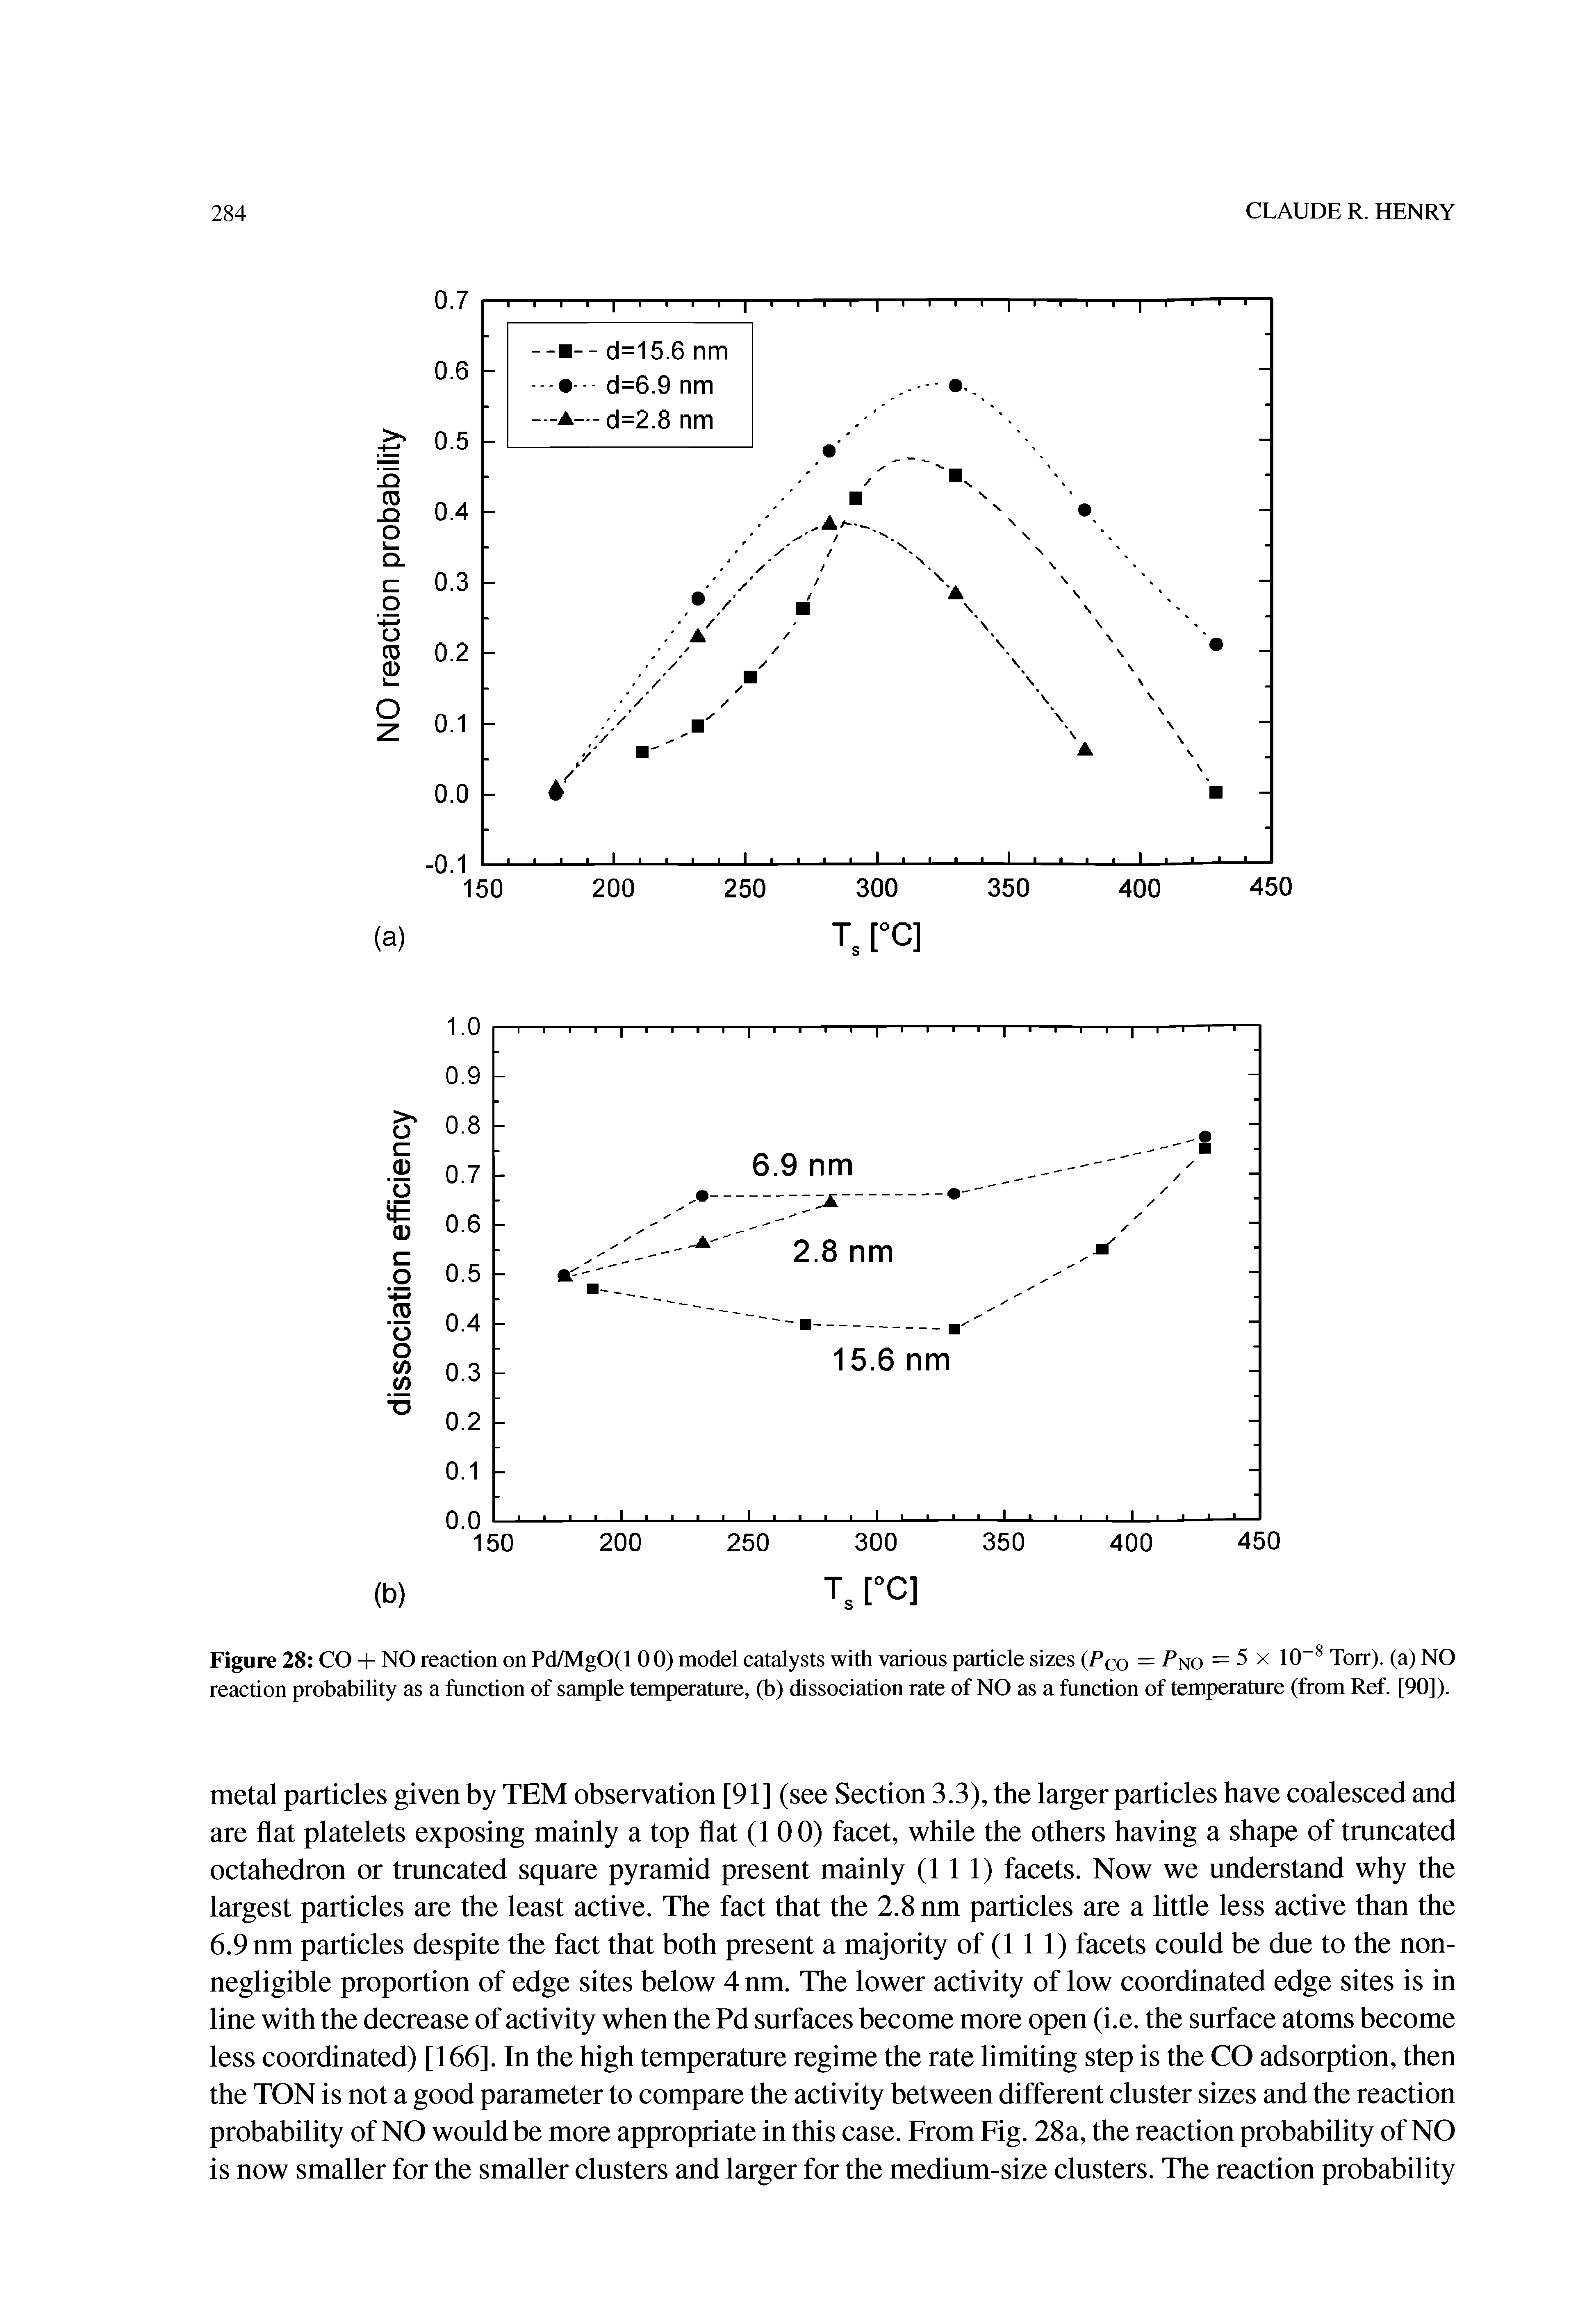 Figure 28 CO + NO reaction on Pd/MgO(l 00) model catalysts with various particle sizes (Pen = no = 5x10 8 Torr). (a) NO reaction probability as a function of sample temperature, (b) dissociation rate of NO as a function of temperature (from Ref. [90]).